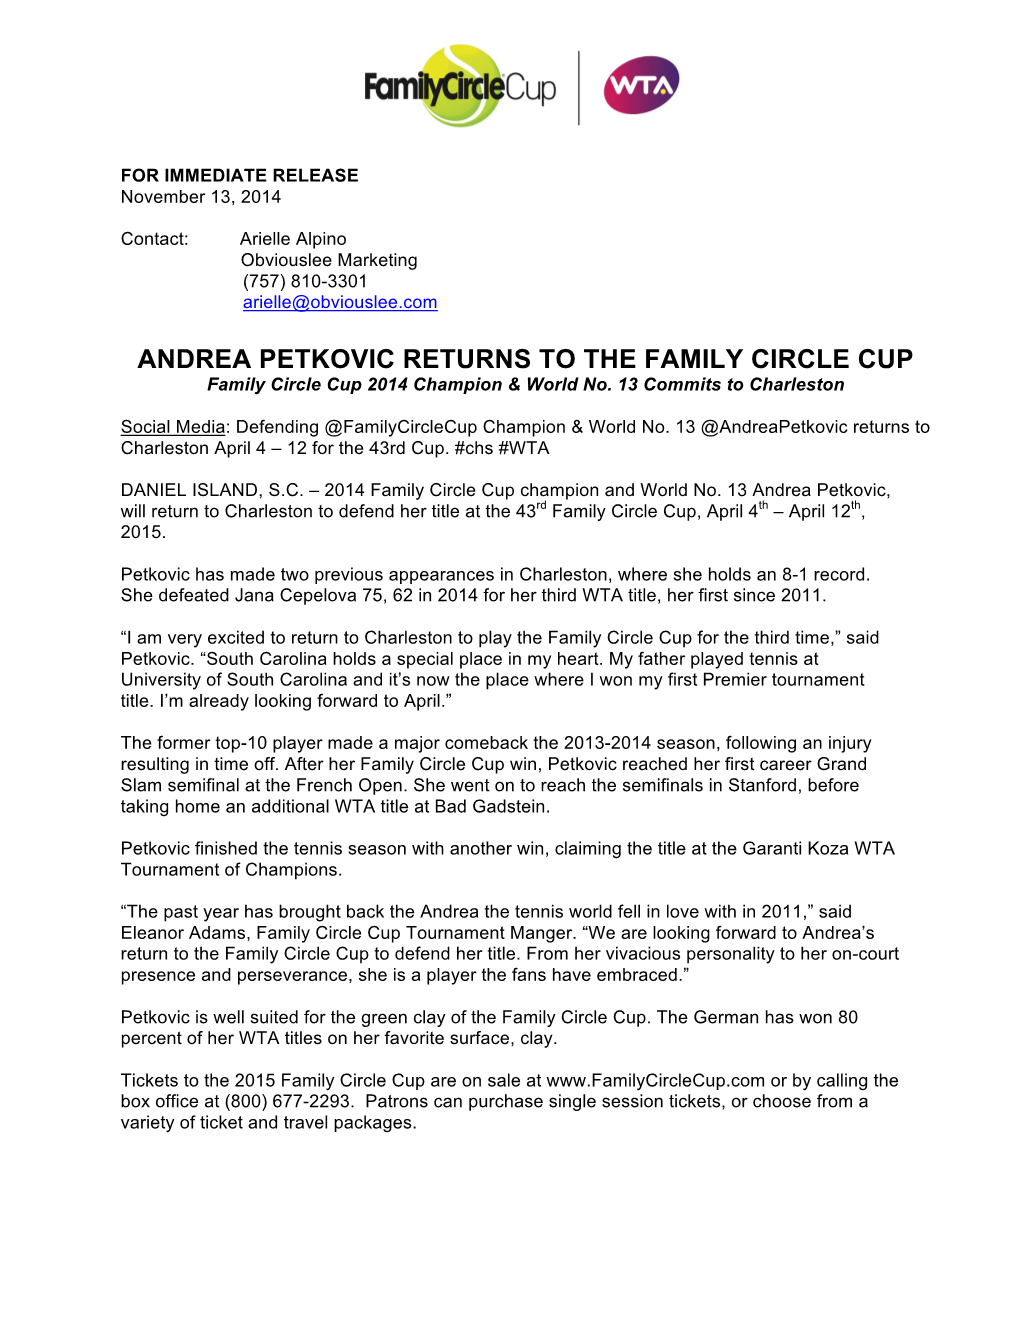 ANDREA PETKOVIC RETURNS to the FAMILY CIRCLE CUP Family Circle Cup 2014 Champion & World No